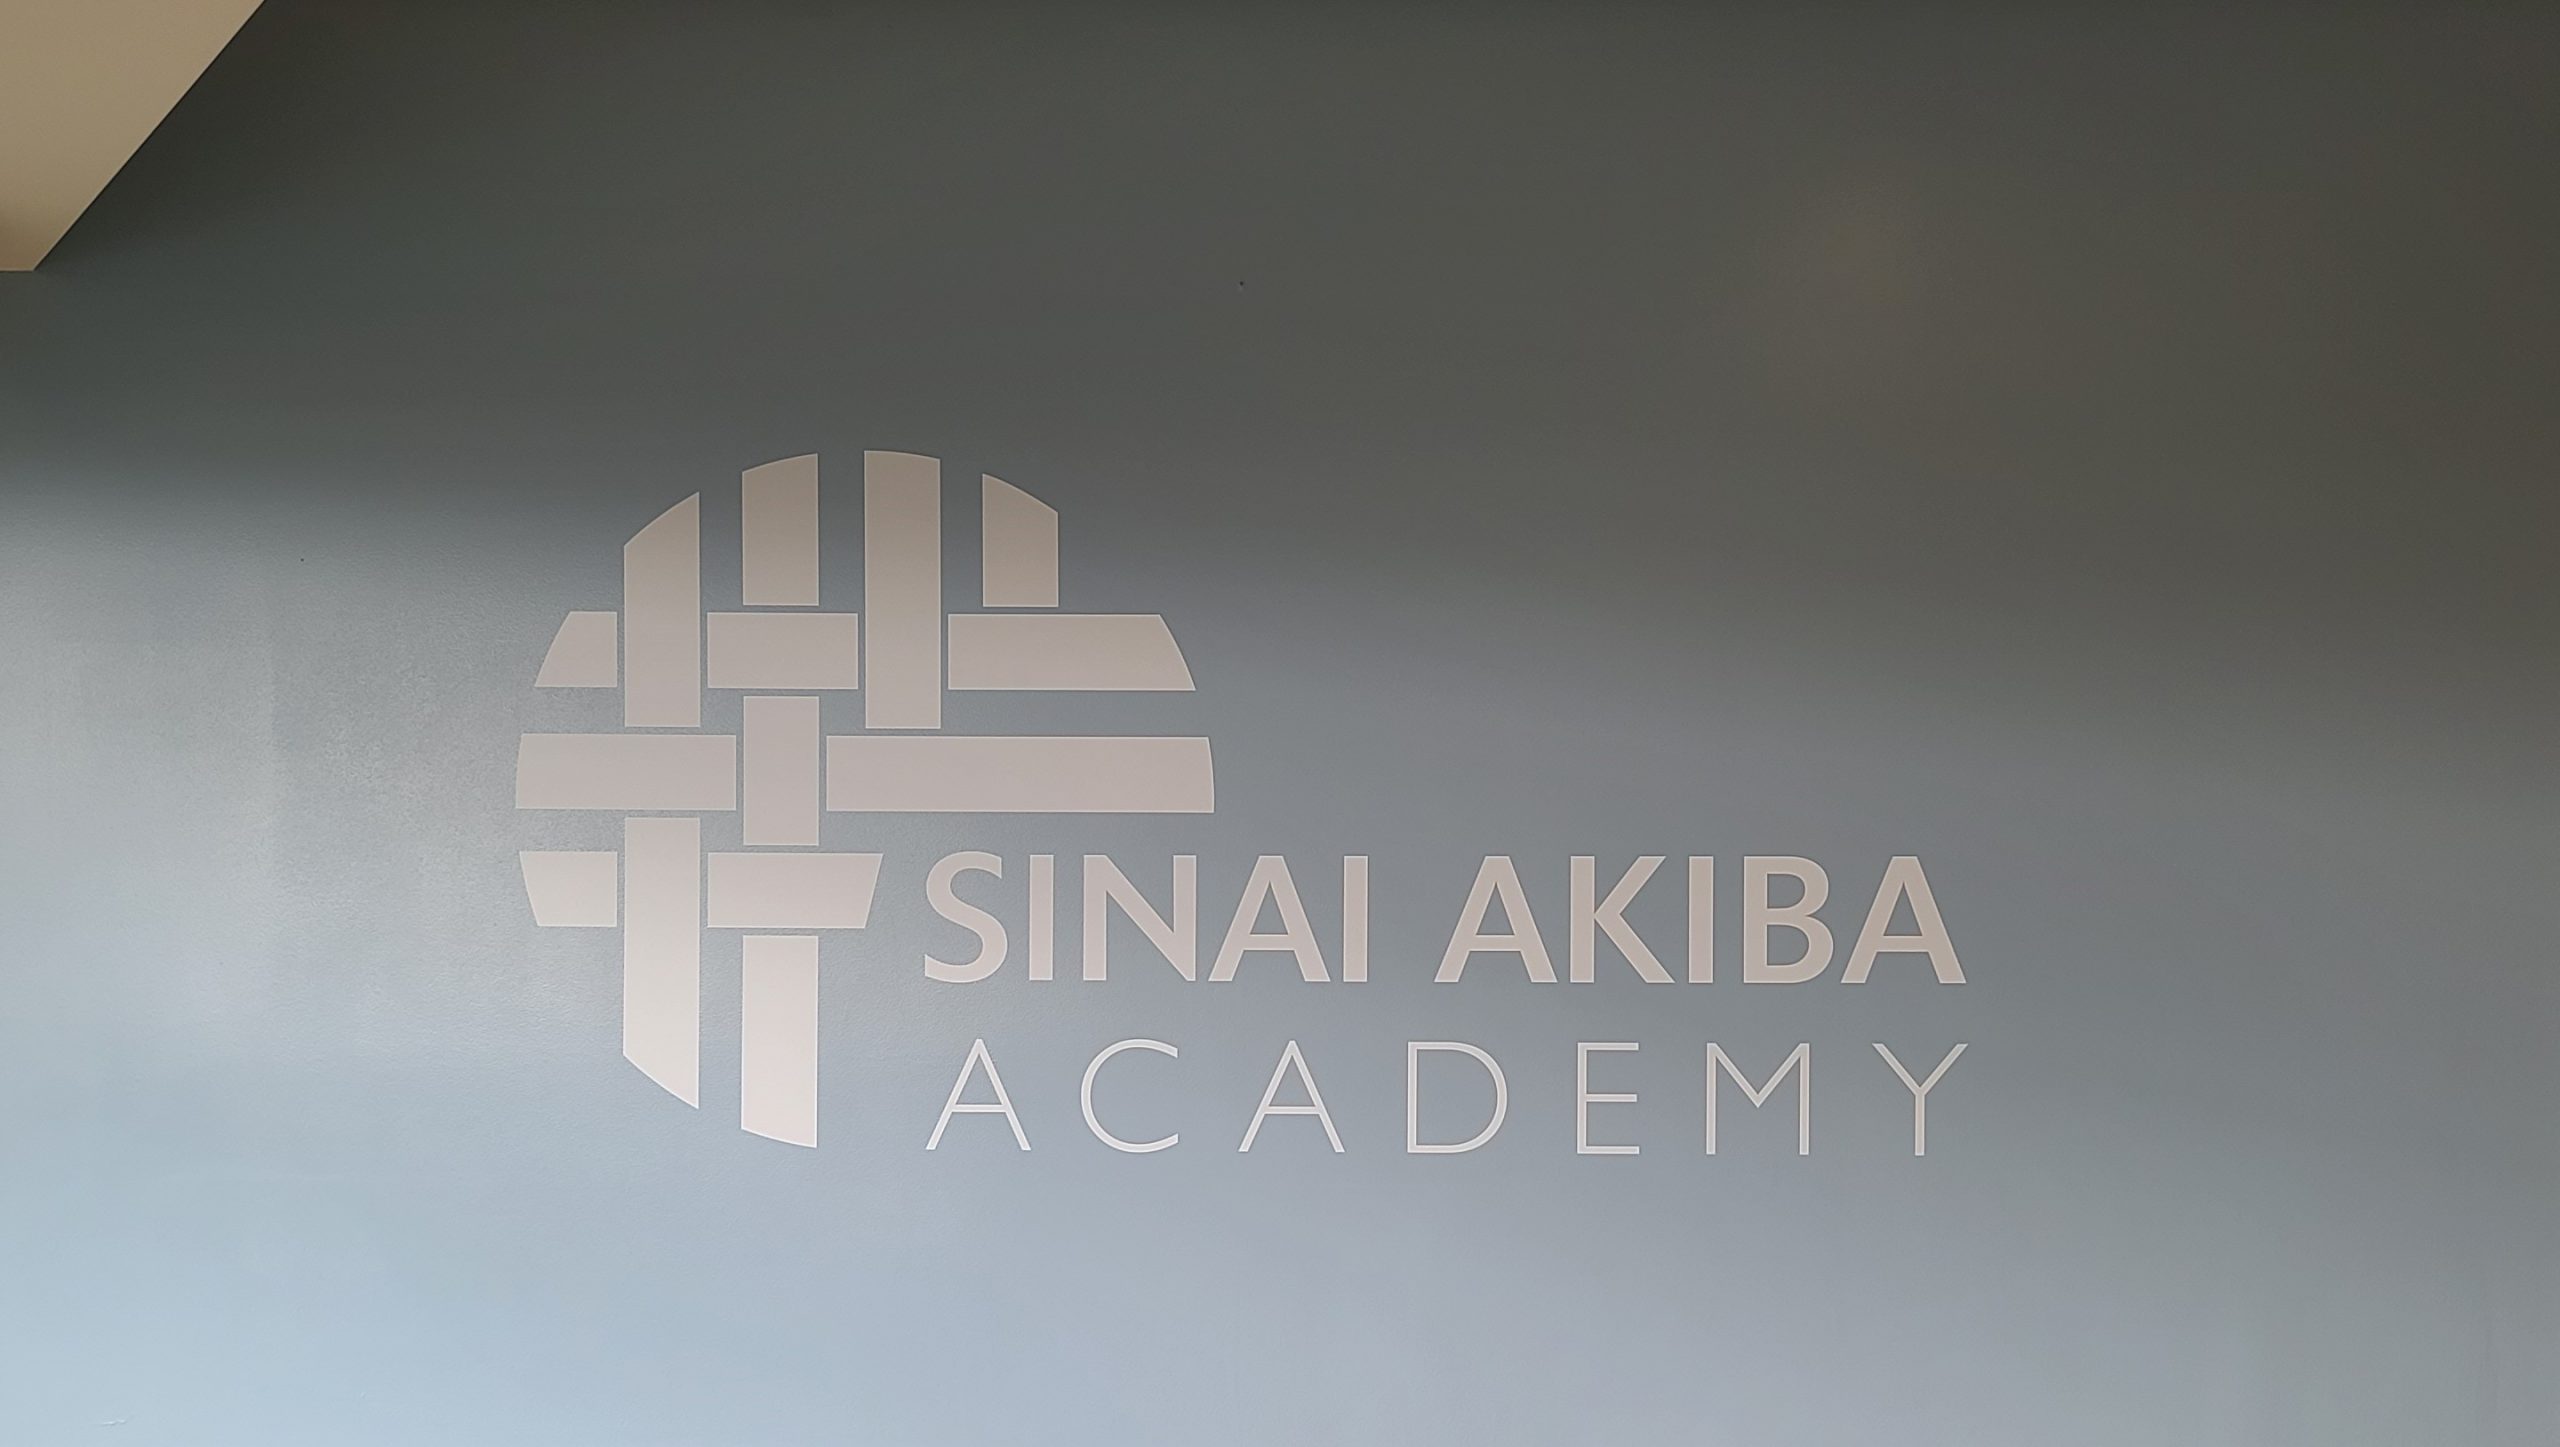 You are currently viewing School Wall Graphics for Sinai Akiba Academy in Los Angeles